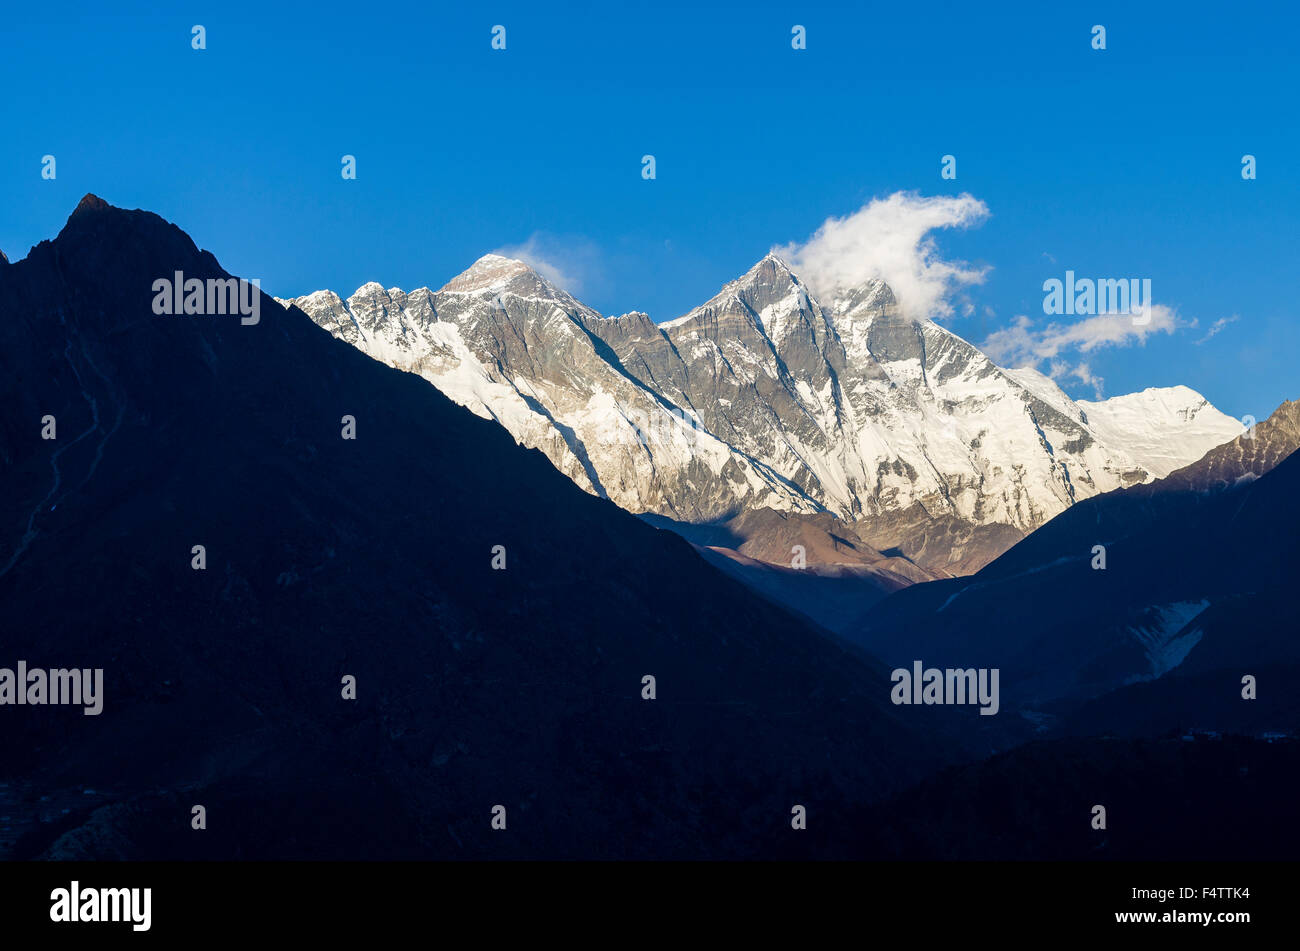 Mount Everest and Lhotse Mountains, the highest mountains of the world, in Solo Khumbu region Stock Photo